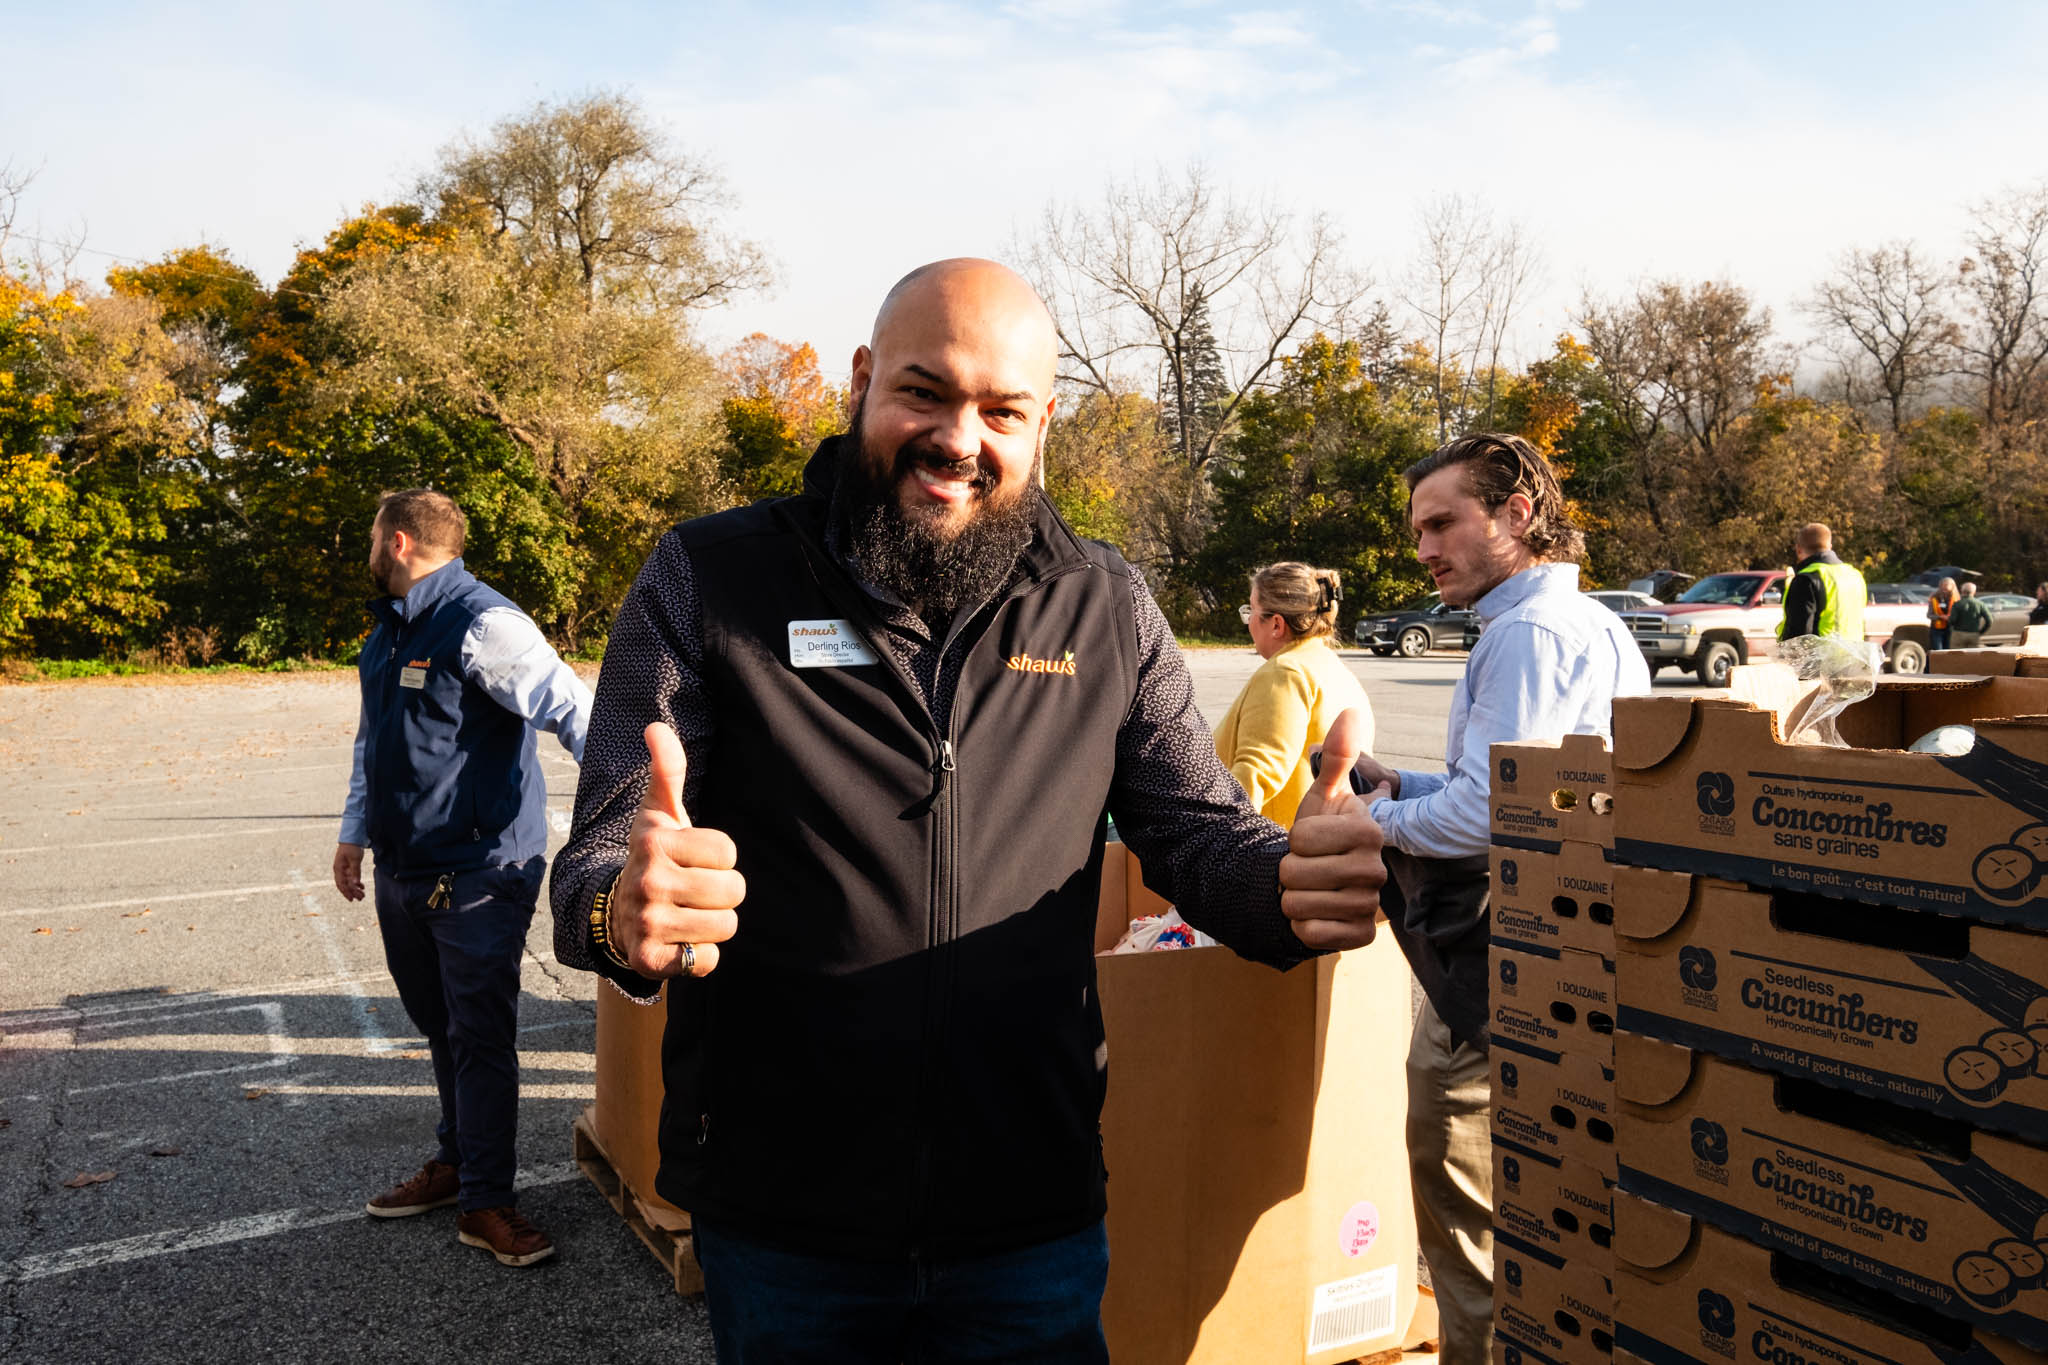 Photo of Shaw's employee giving the thumbs up at a food distribution event.